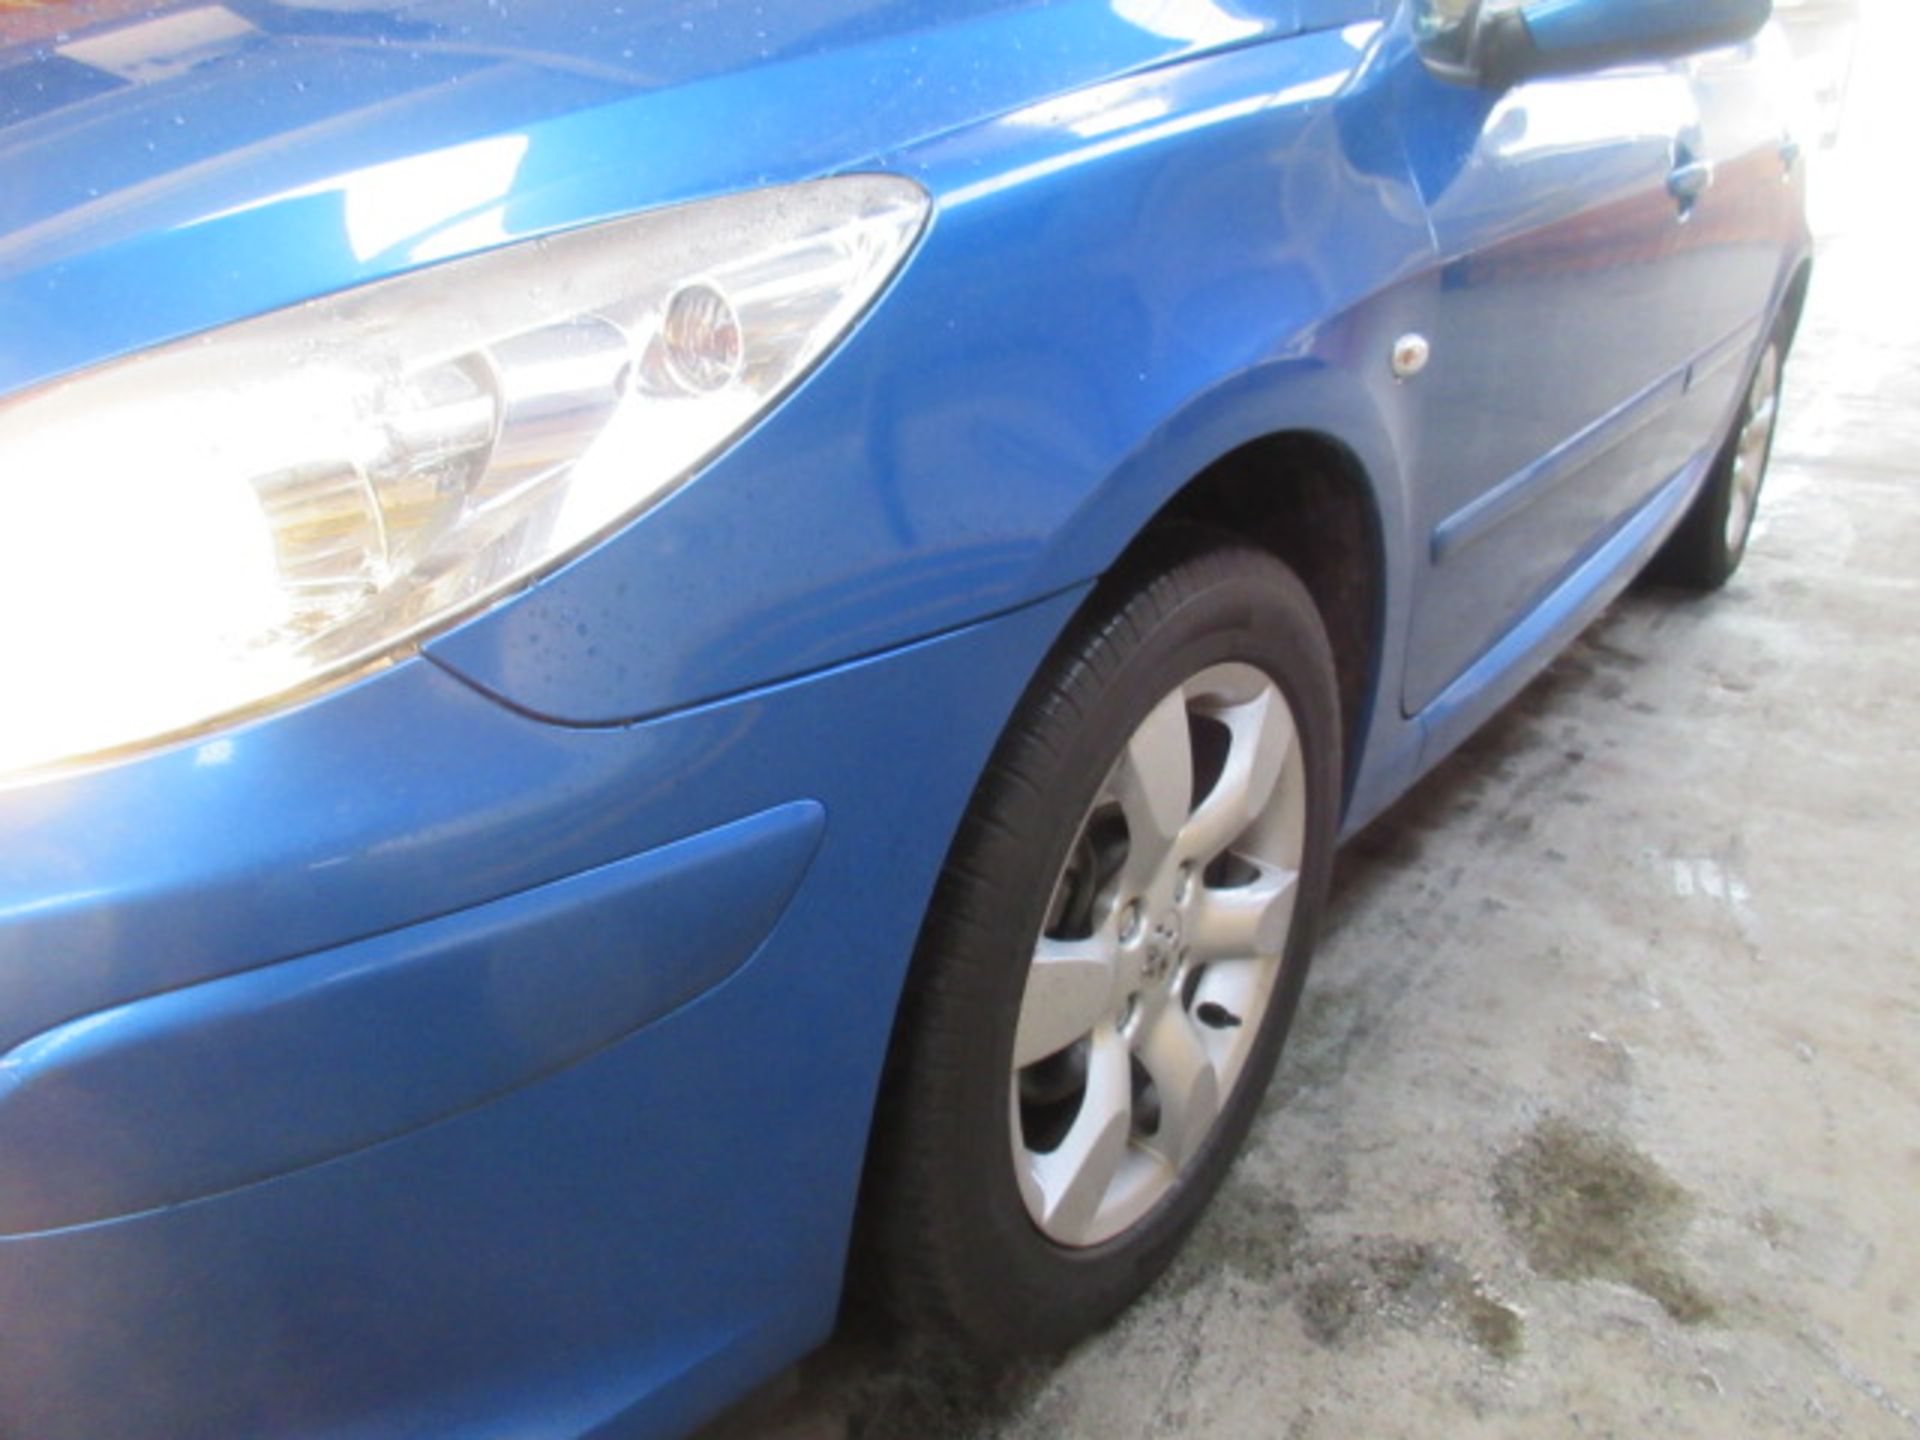 57 07 Peugeot 307 S - Image 7 of 17